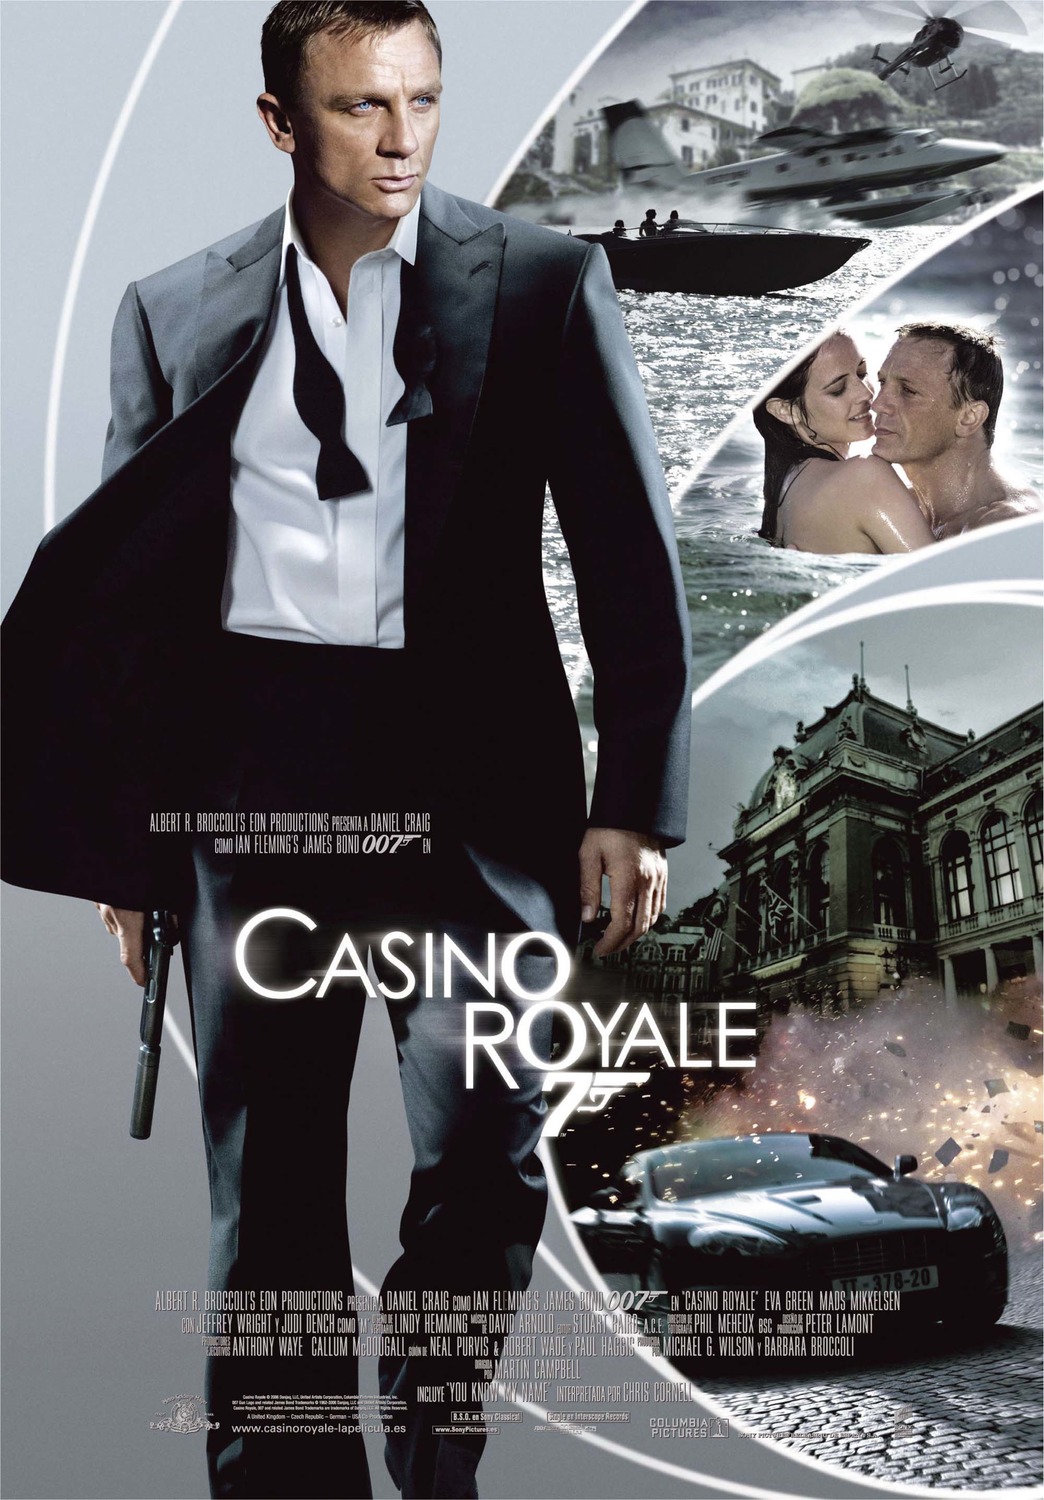 differences between casino royale book and film